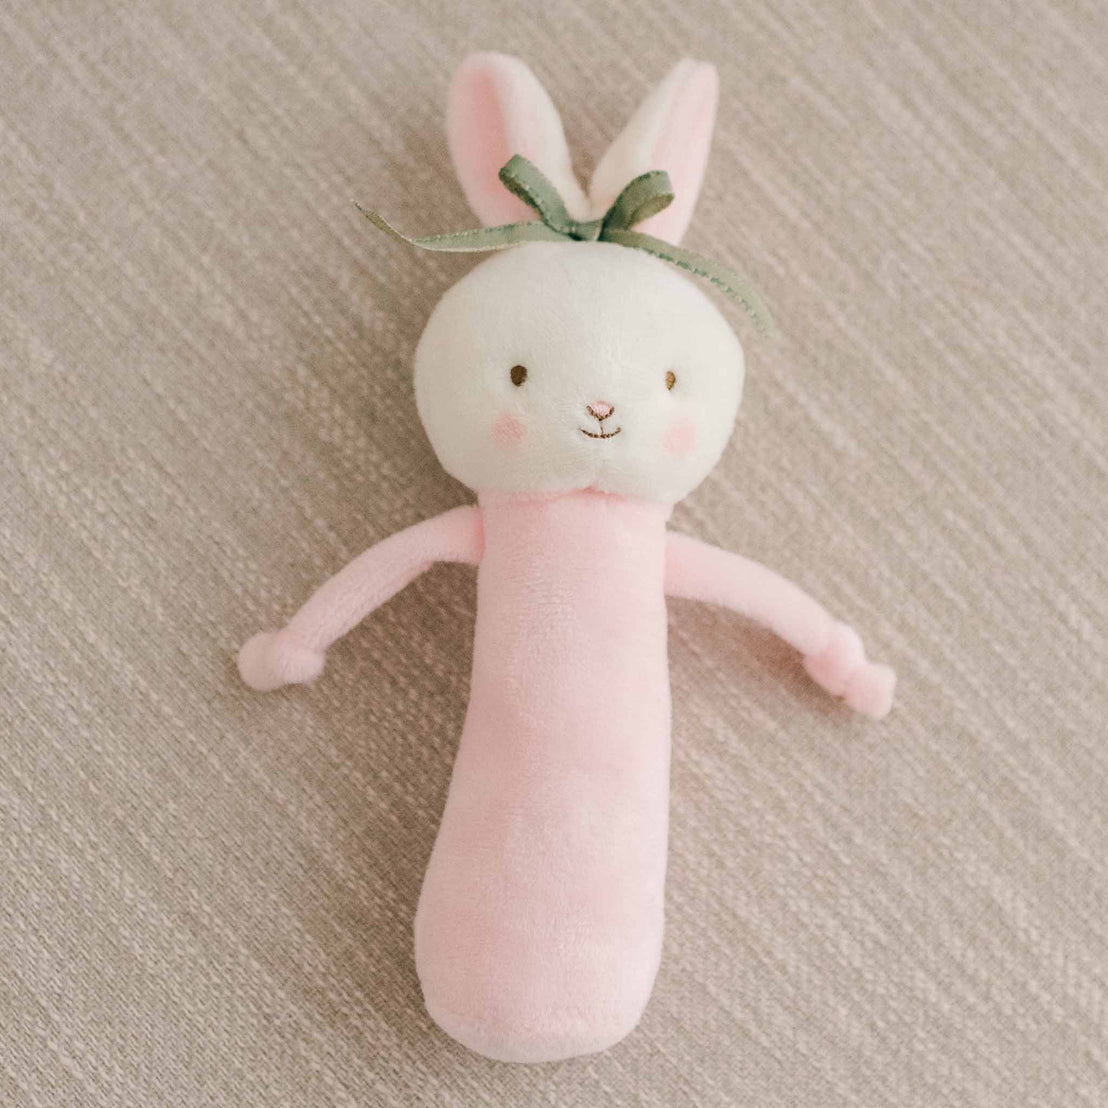 Natalie pink bunny chime rattle